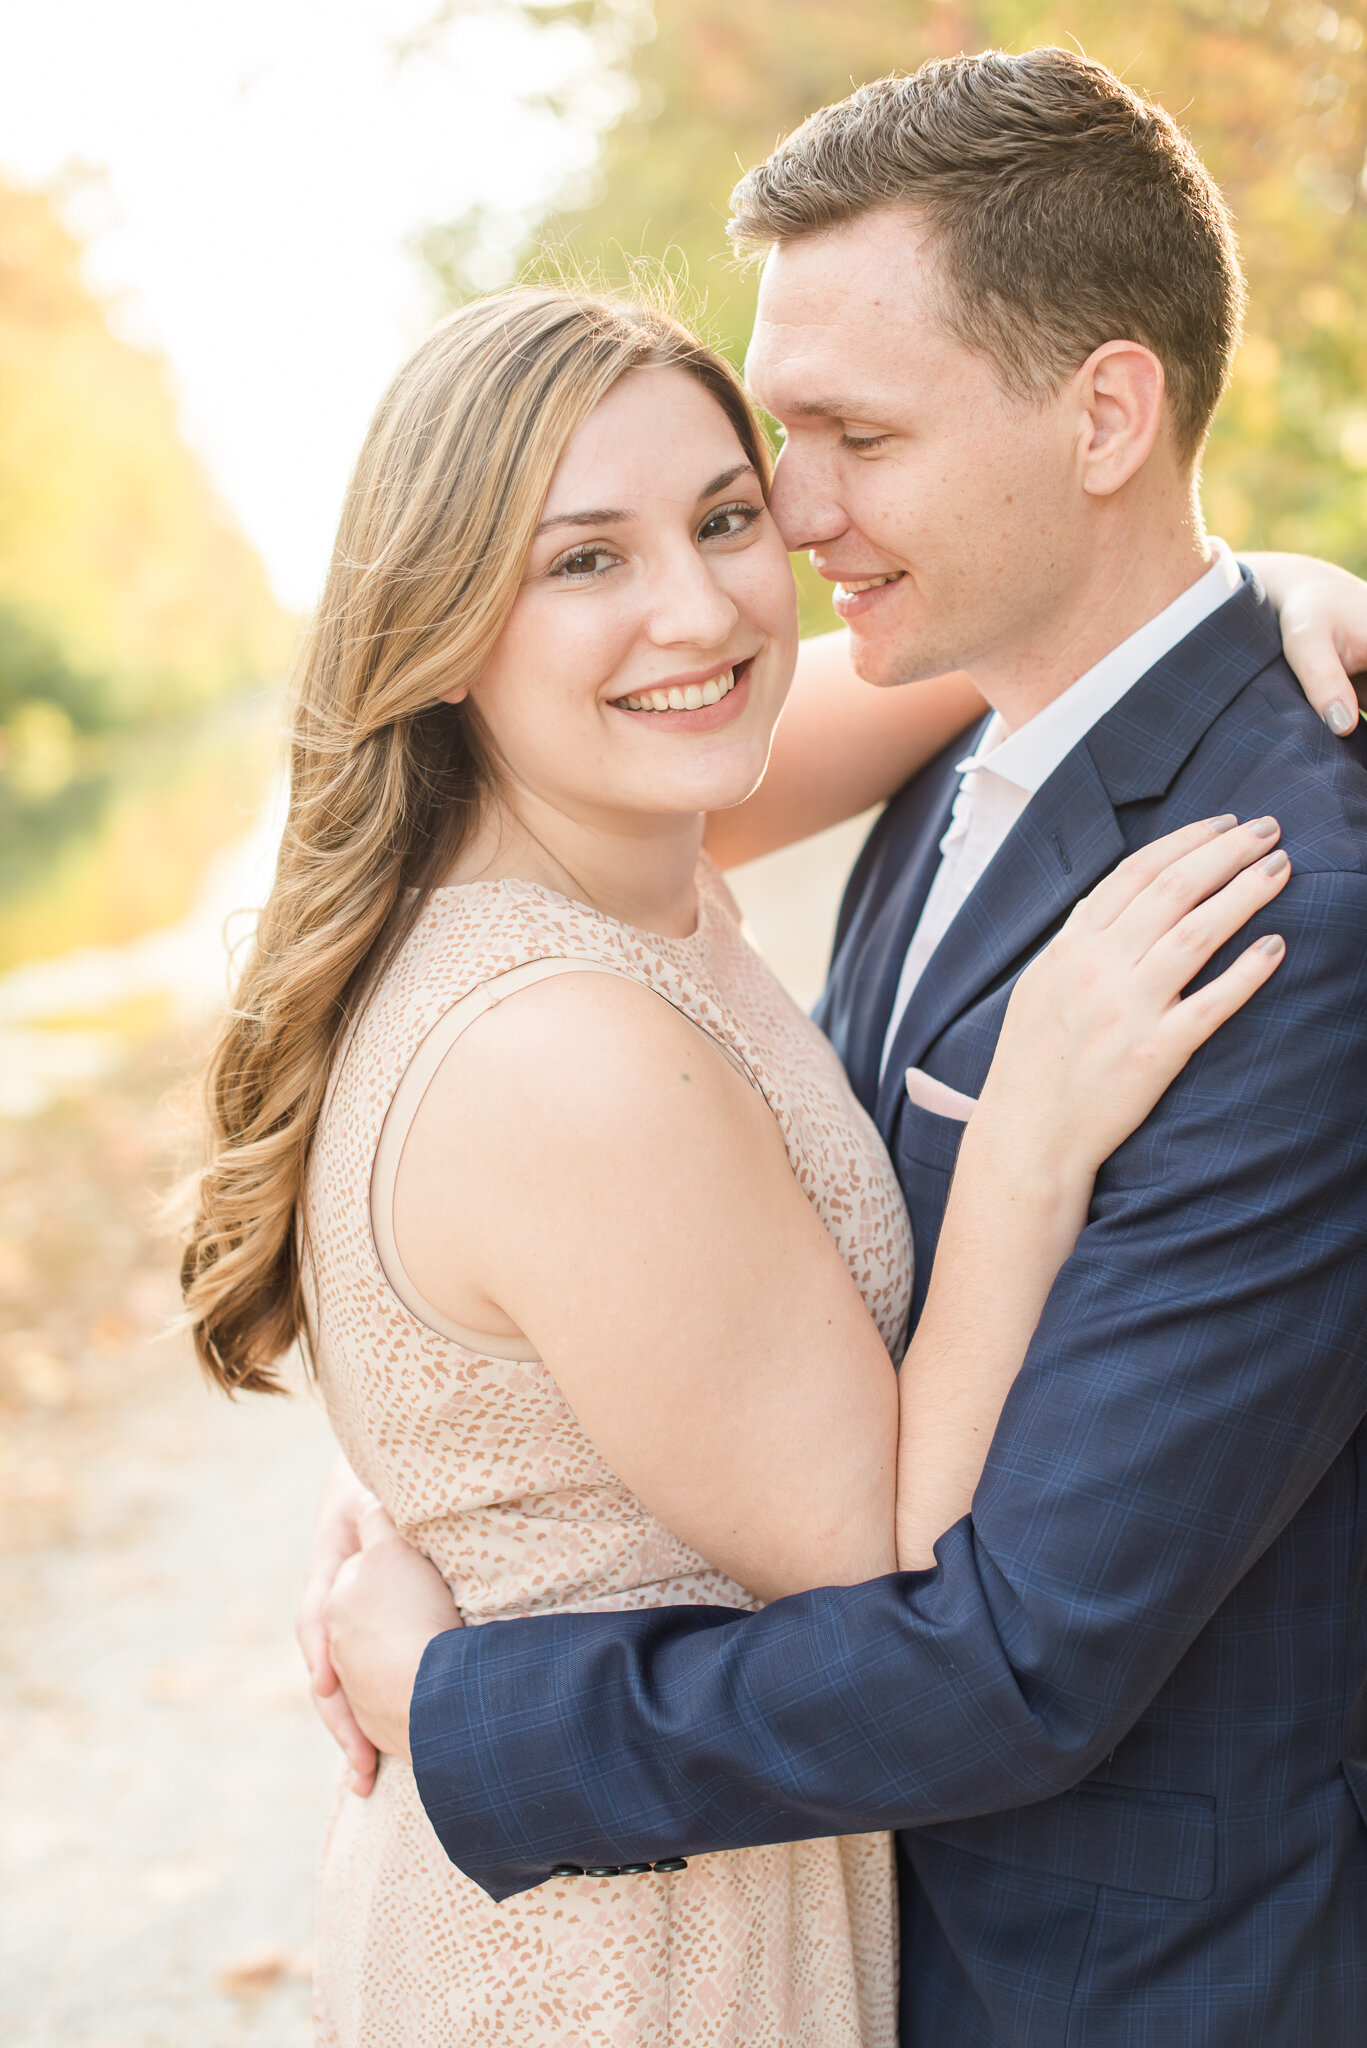 October Engagement Session at Holcomb Gardens7515.jpg